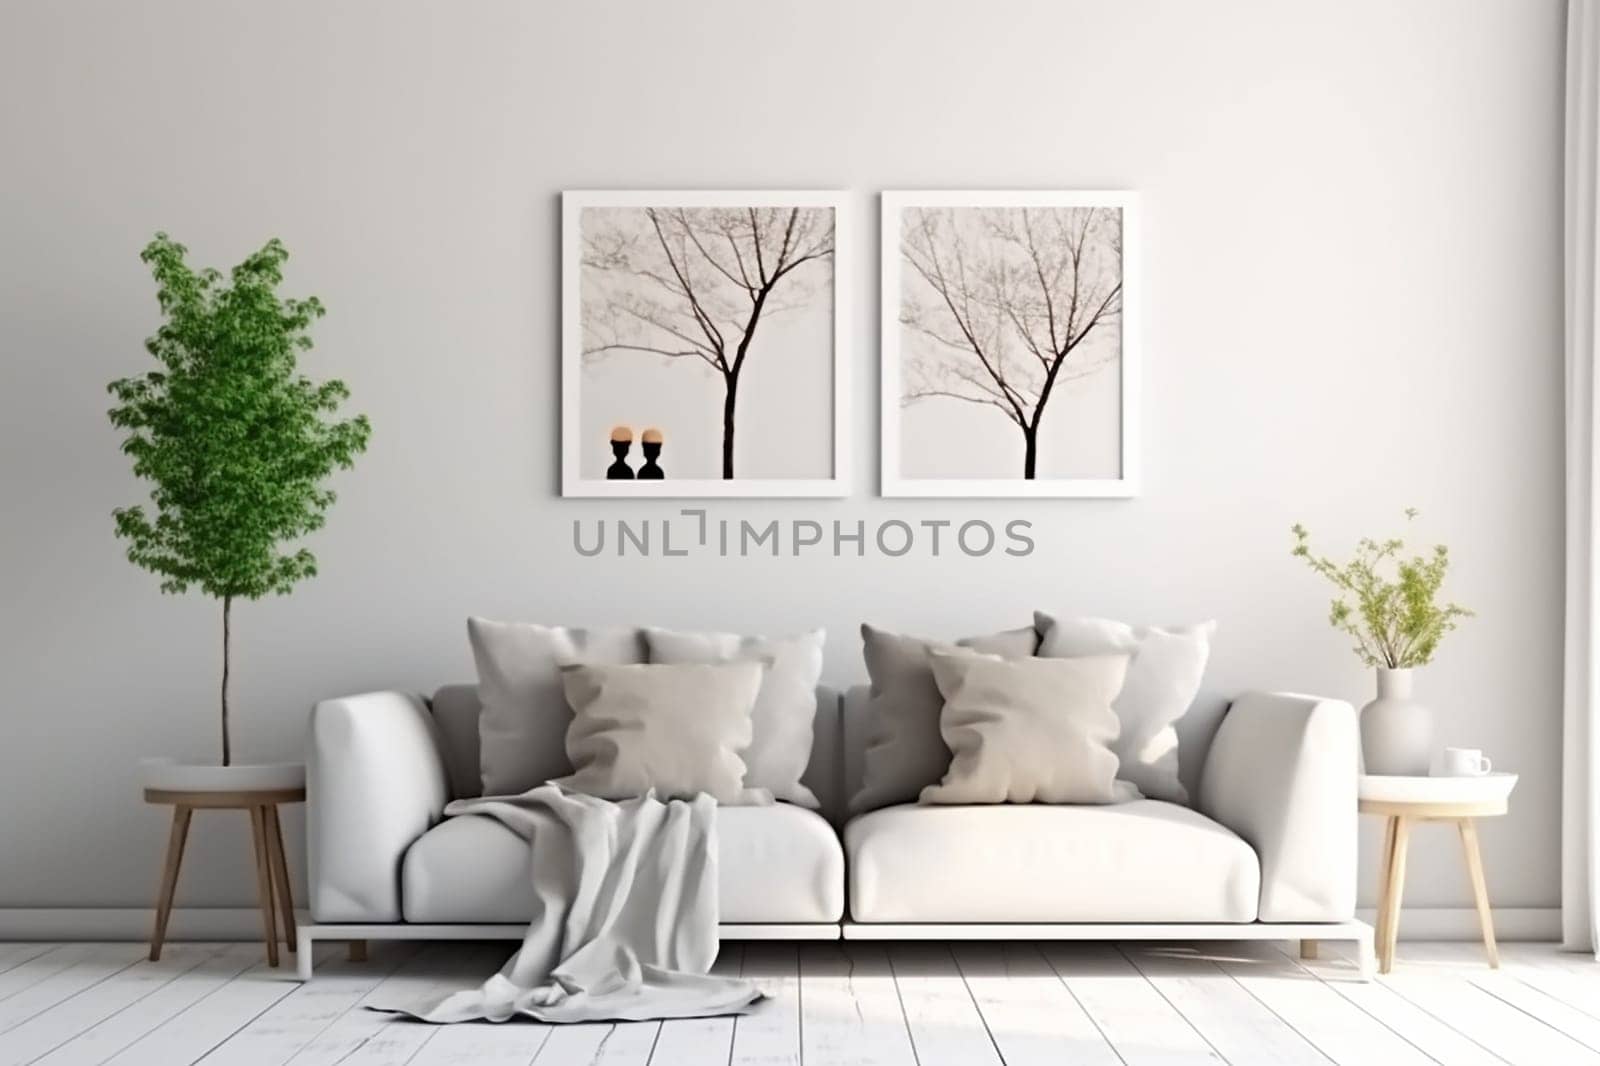 Mock up for two square frames, minimalist living room interior with a blank frame, gray sofa, indoor plant, and decorative vase on a side table.